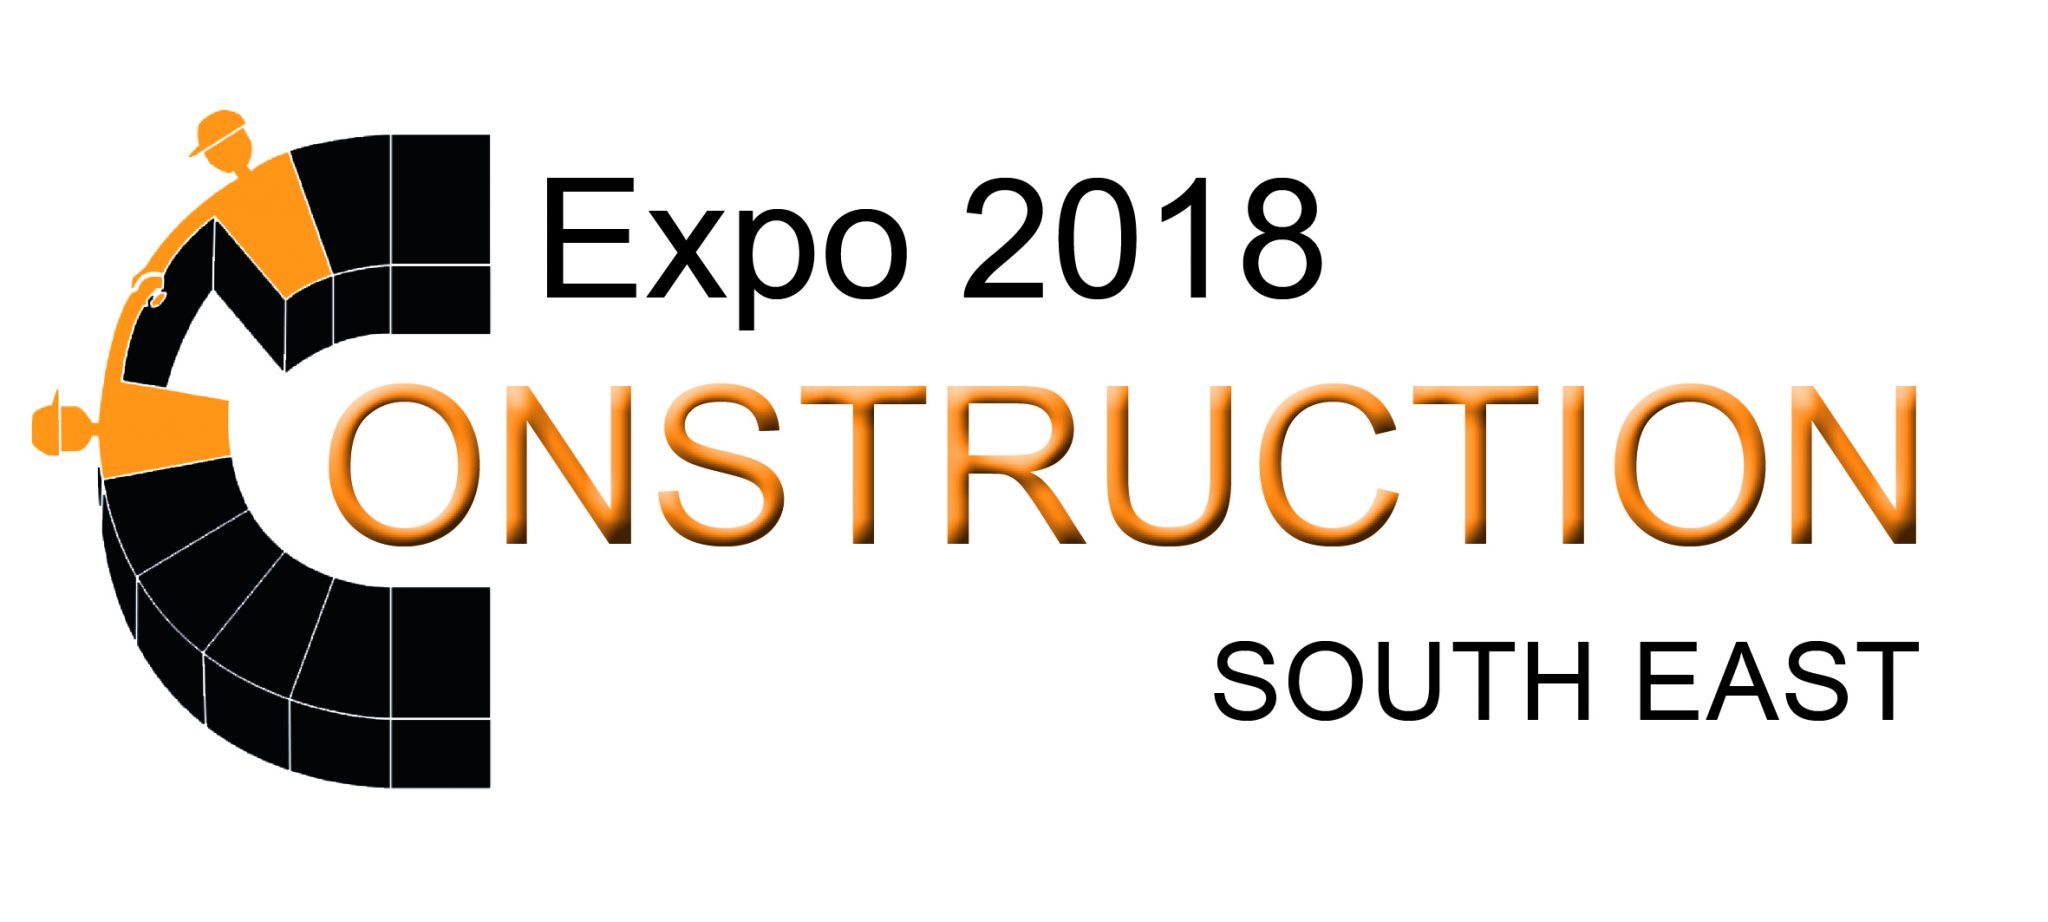 Join us at Construction Expo South East 2018